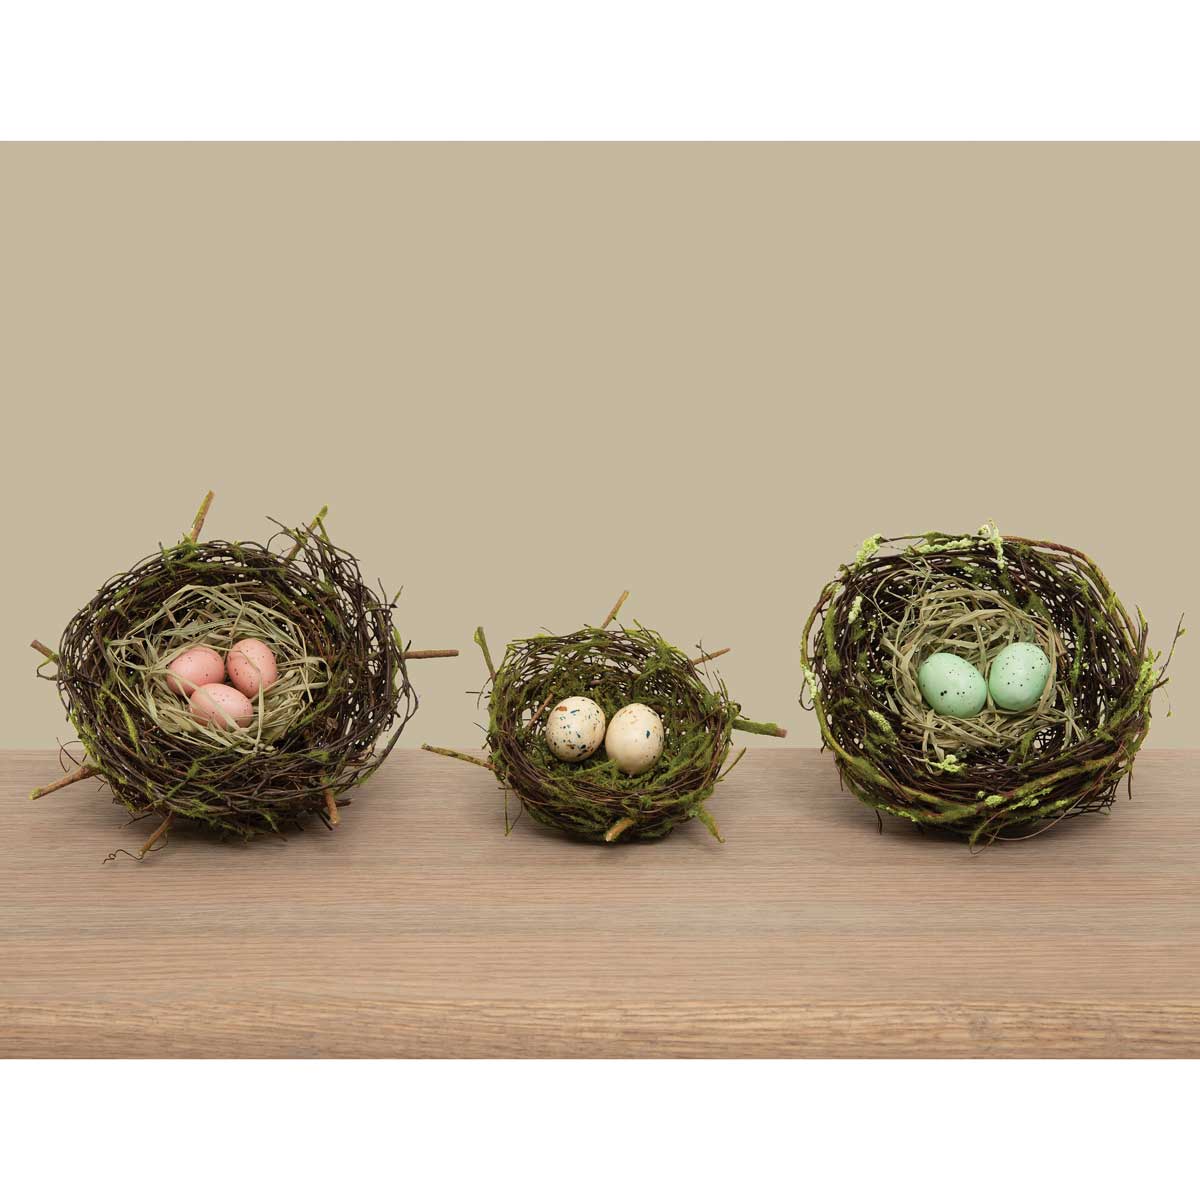 TWIG NEST WITH MOSS AND CREAM EGGS 5"X2"